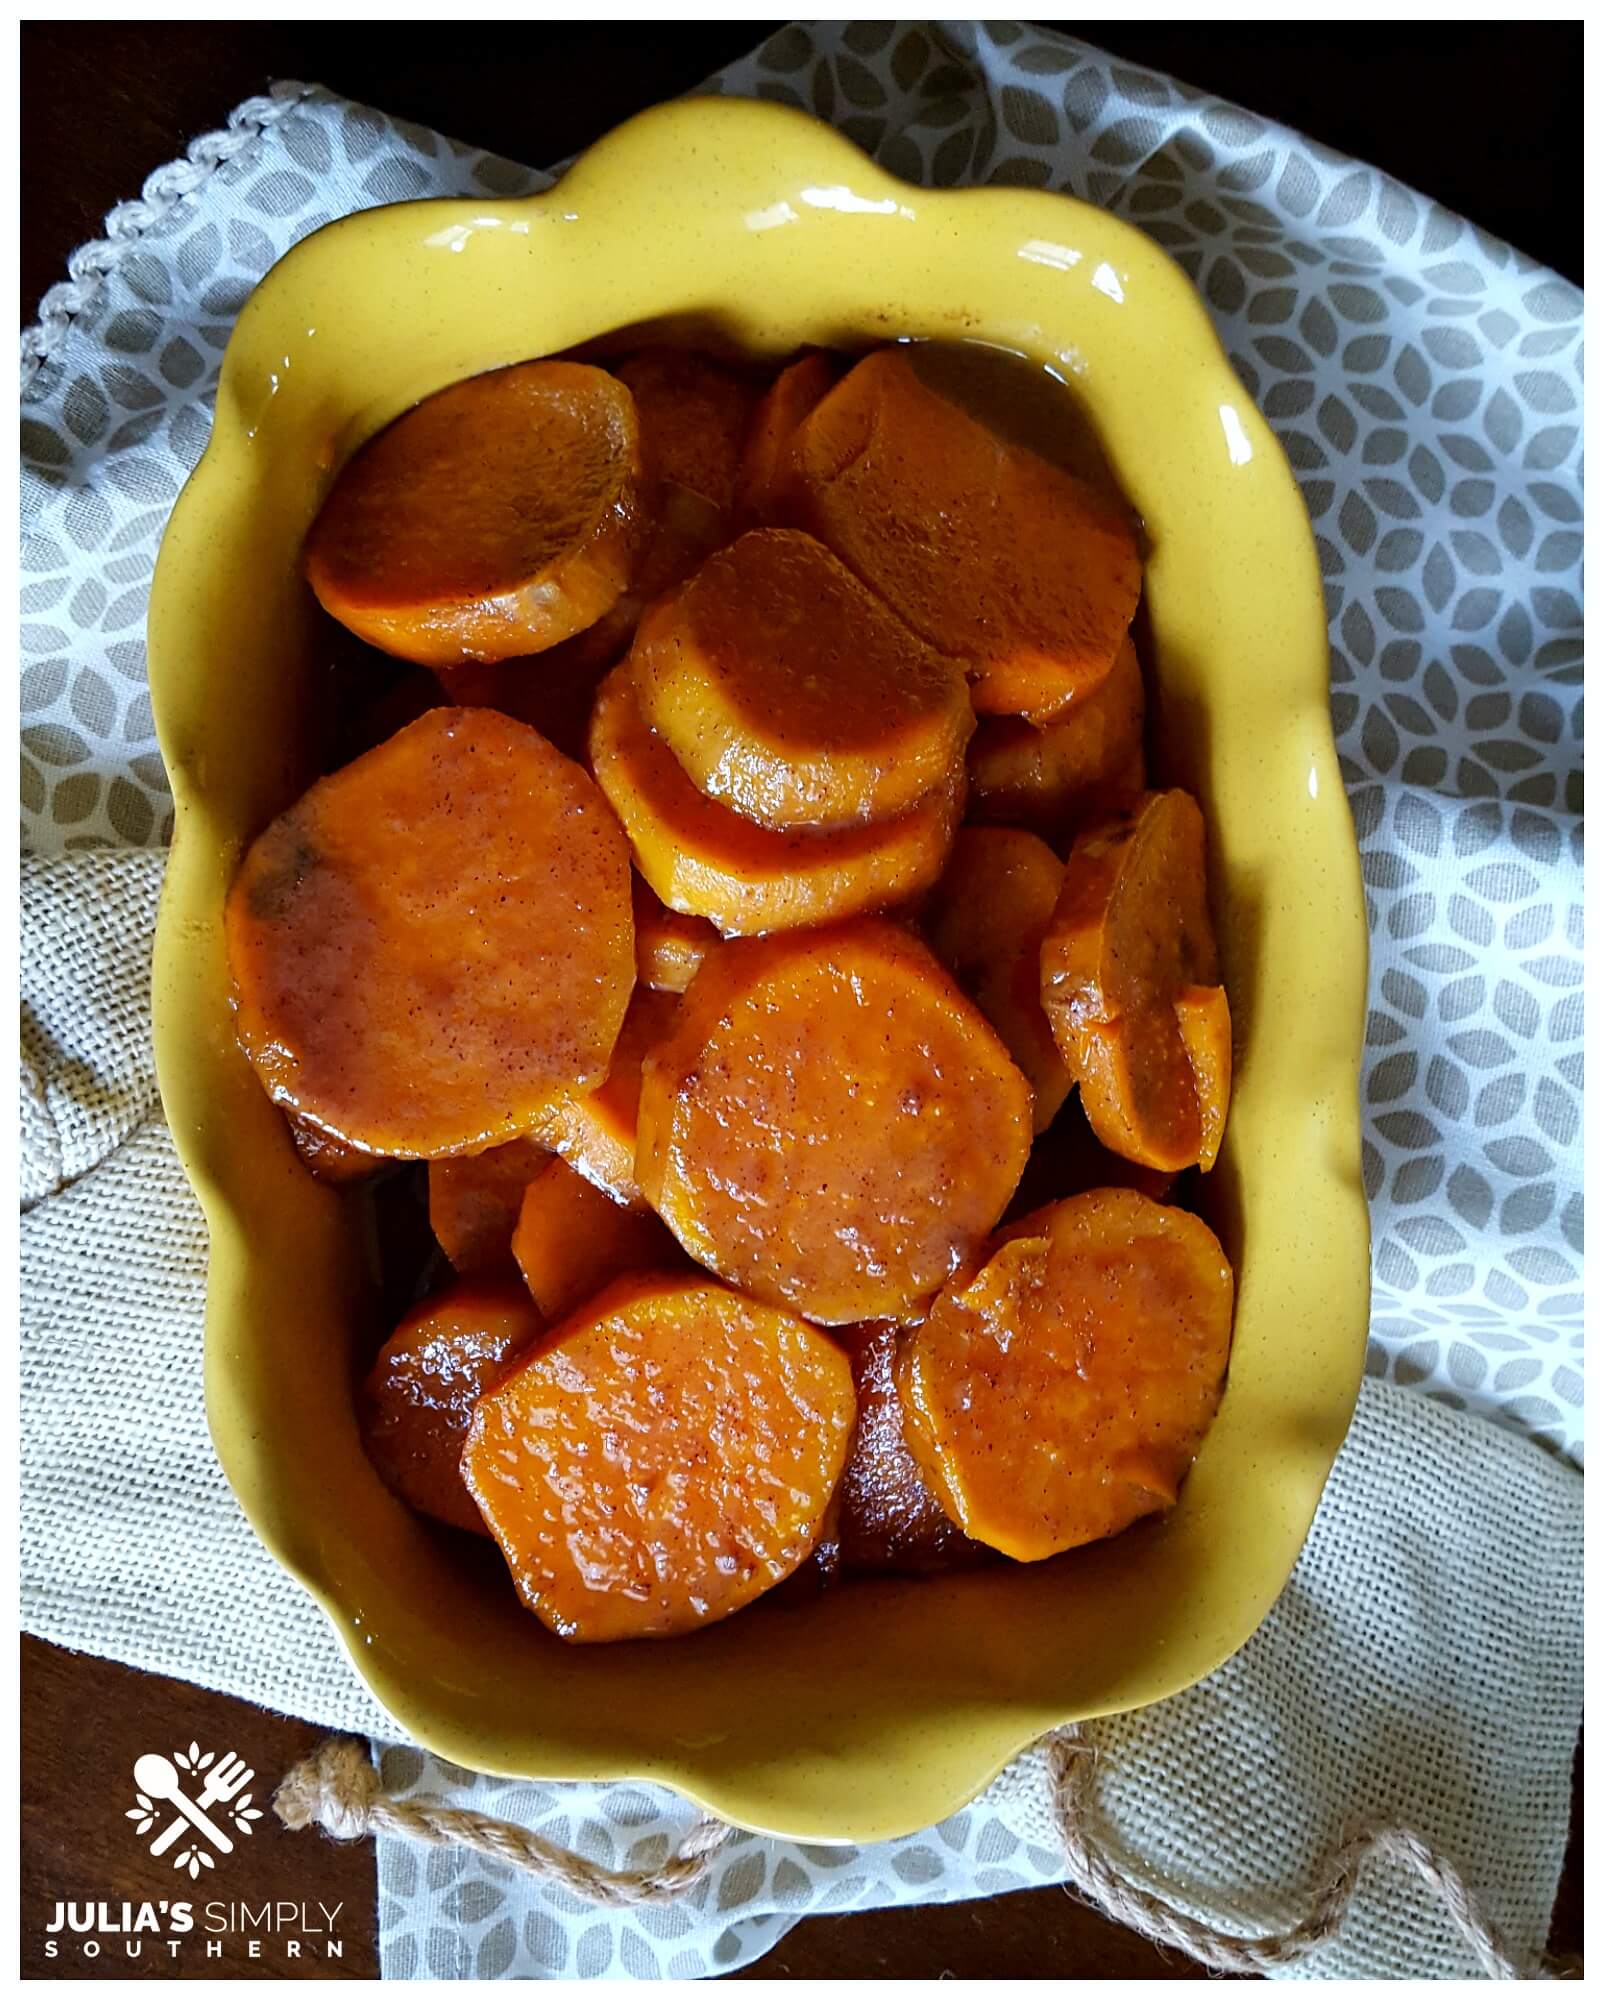 How to make homemade candied yams for the holidays